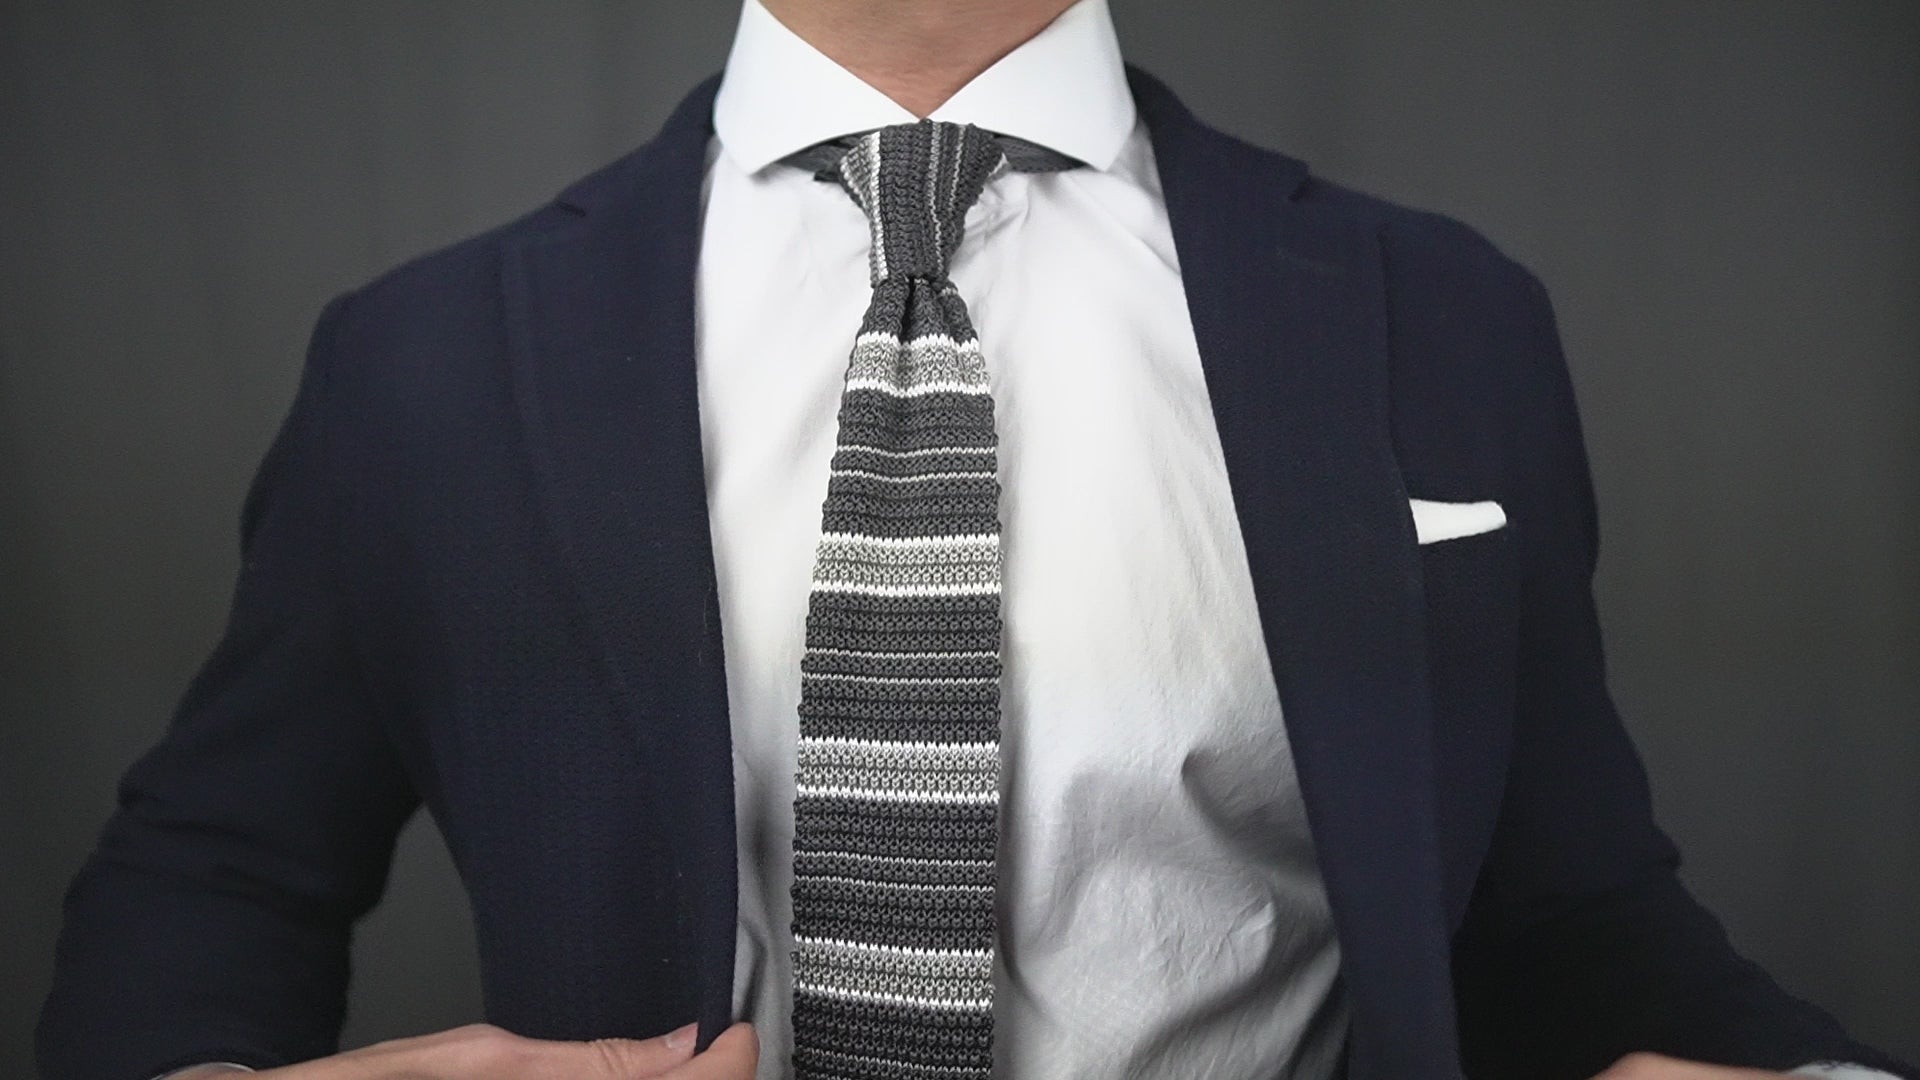 the melbourne silk knit tie modeled